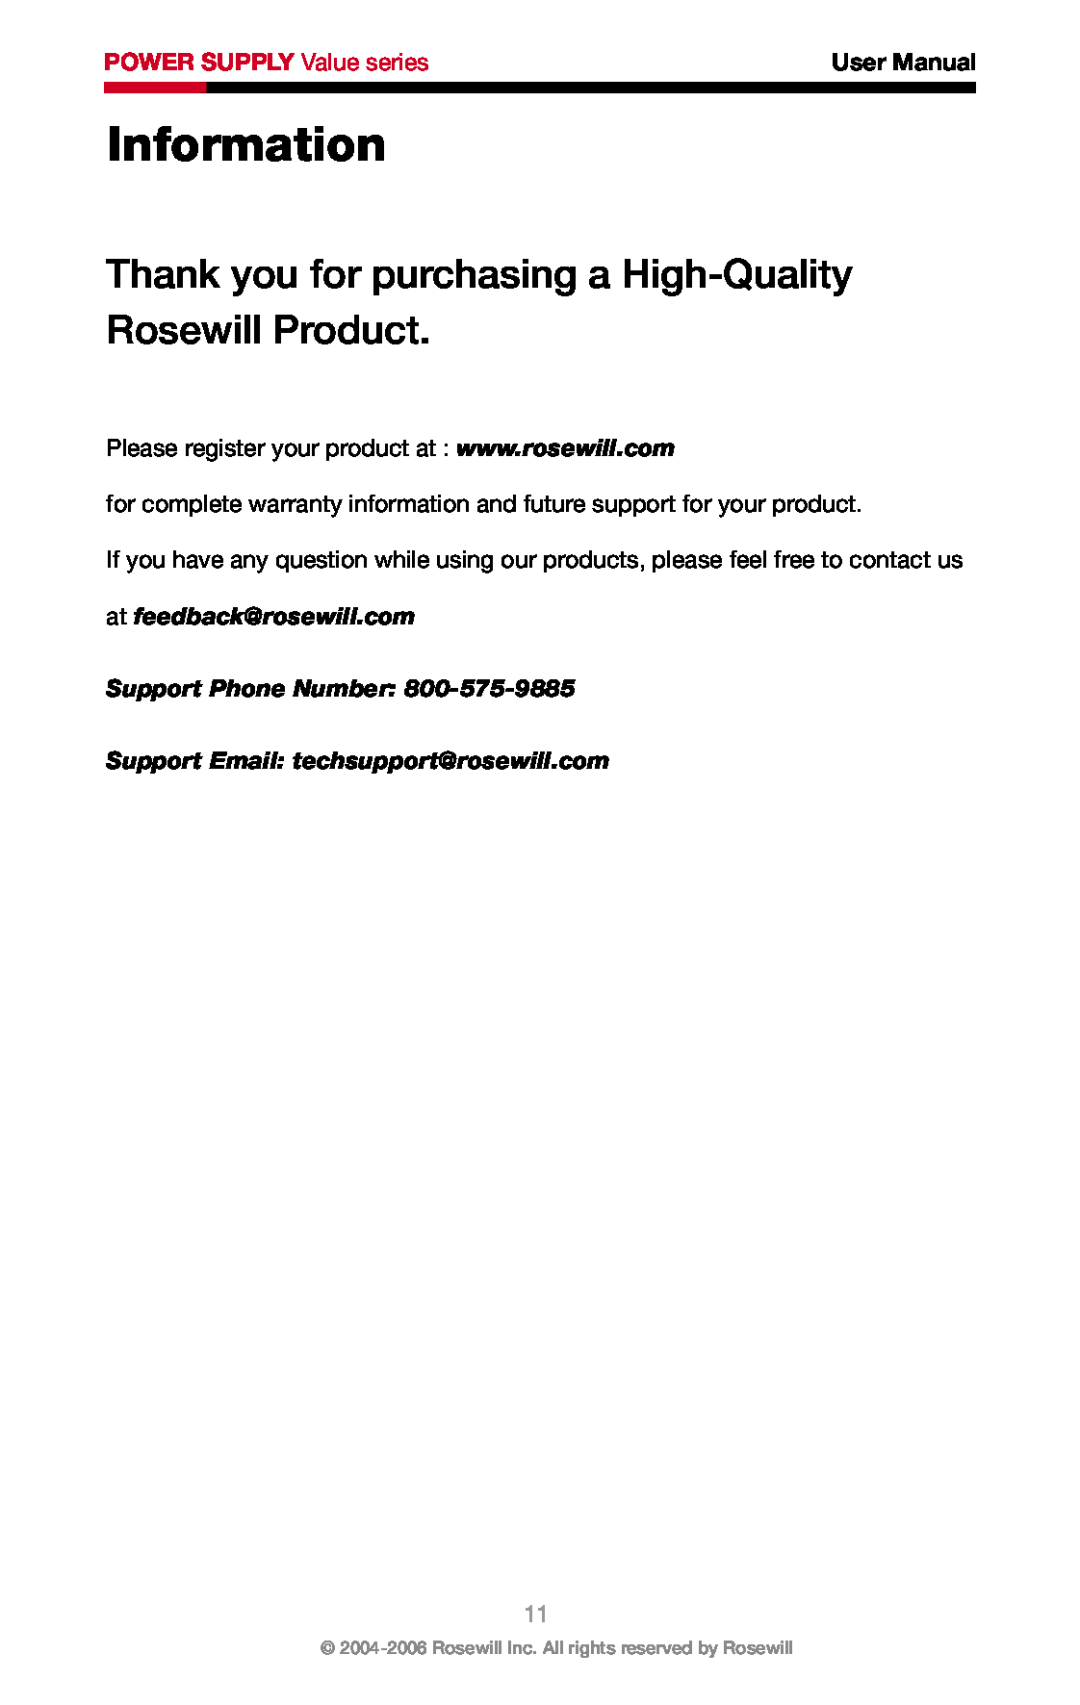 Rosewill RV-430-2-FRB Information, Thank you for purchasing a High-Quality Rosewill Product, POWER SUPPLY Value series 